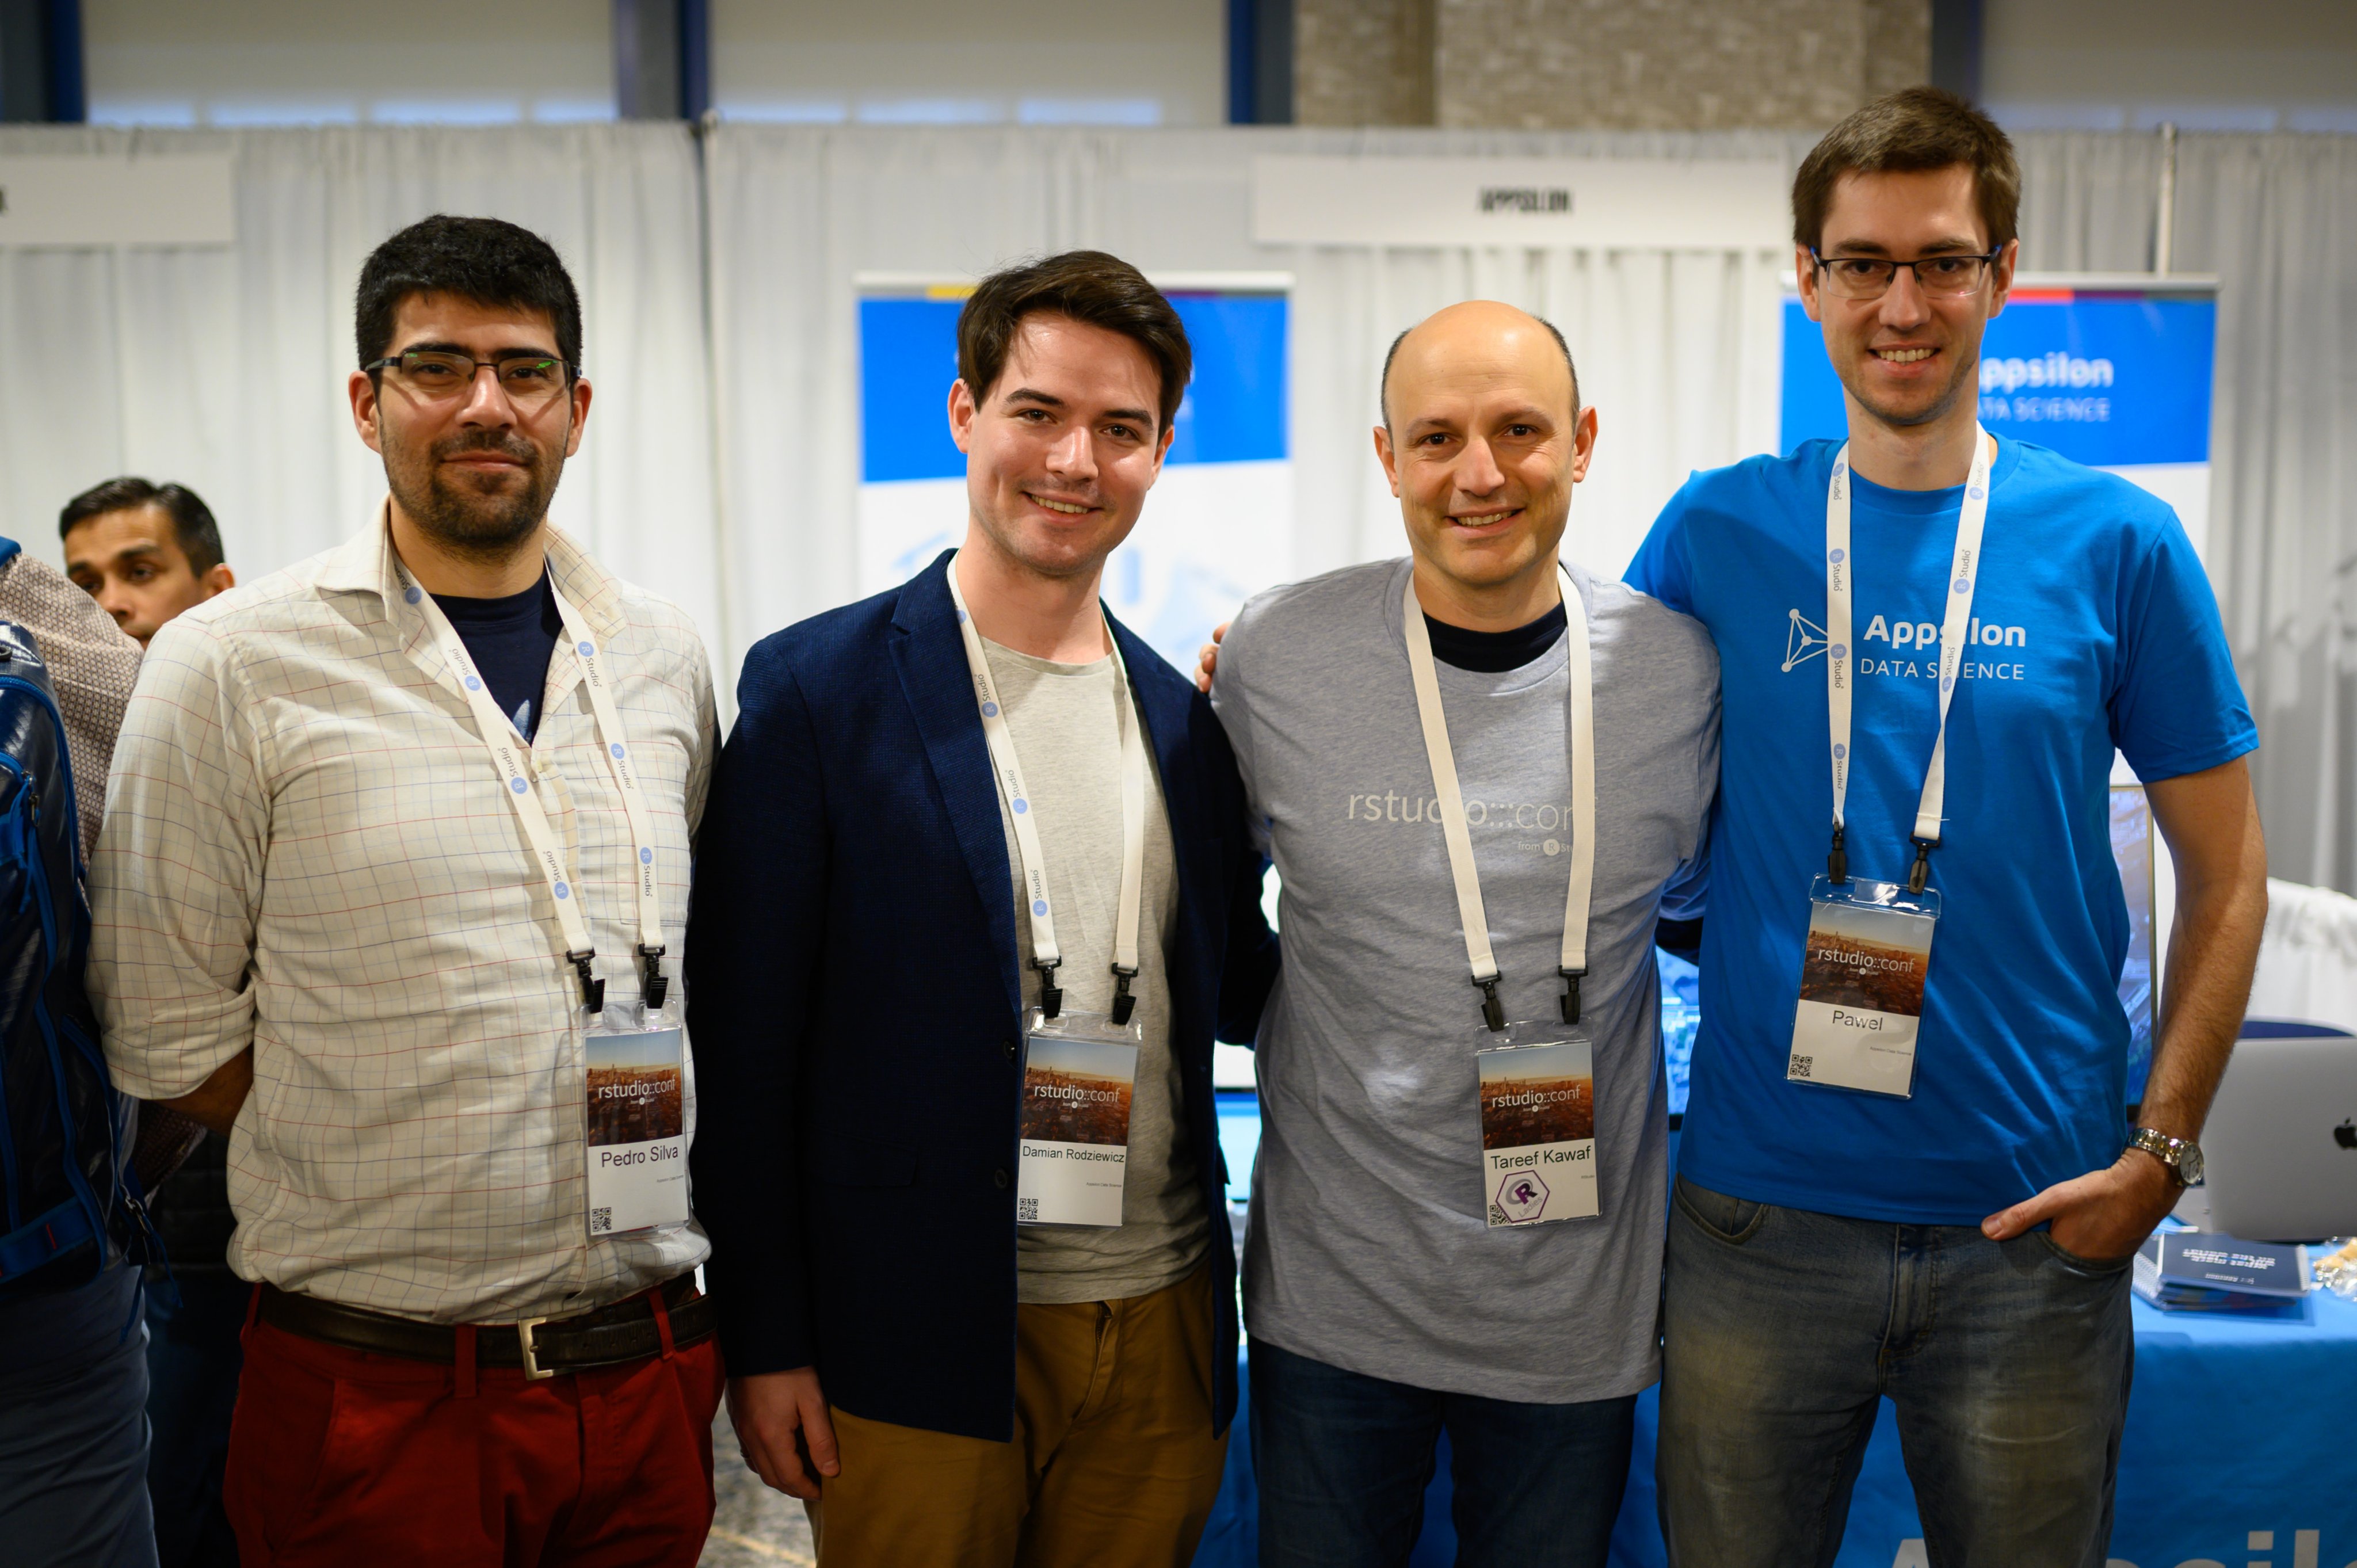 the Appsilon team and the RStudio president